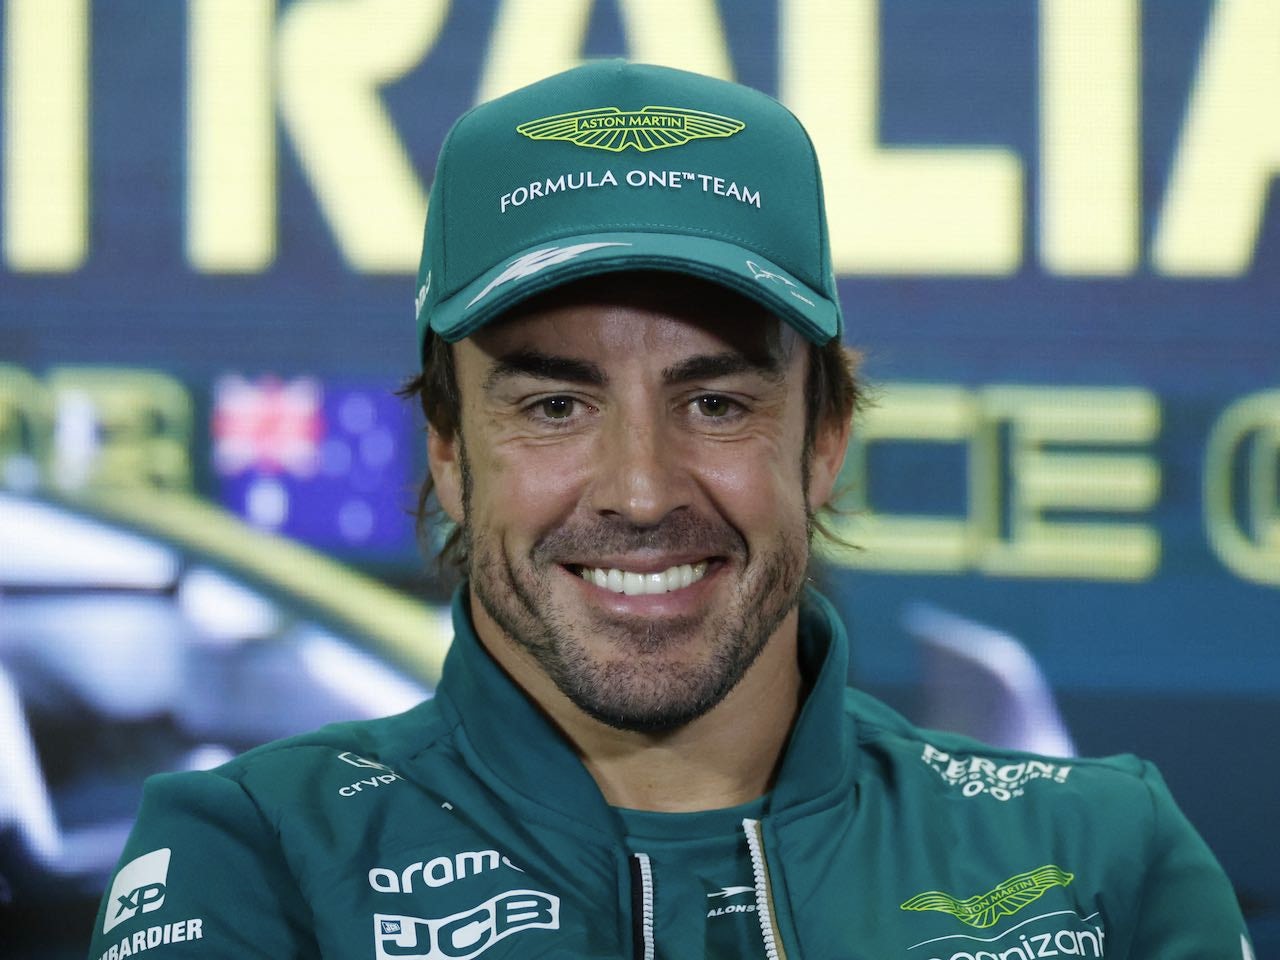 Hamilton 'weaknesses' showing in 2023 - Alonso